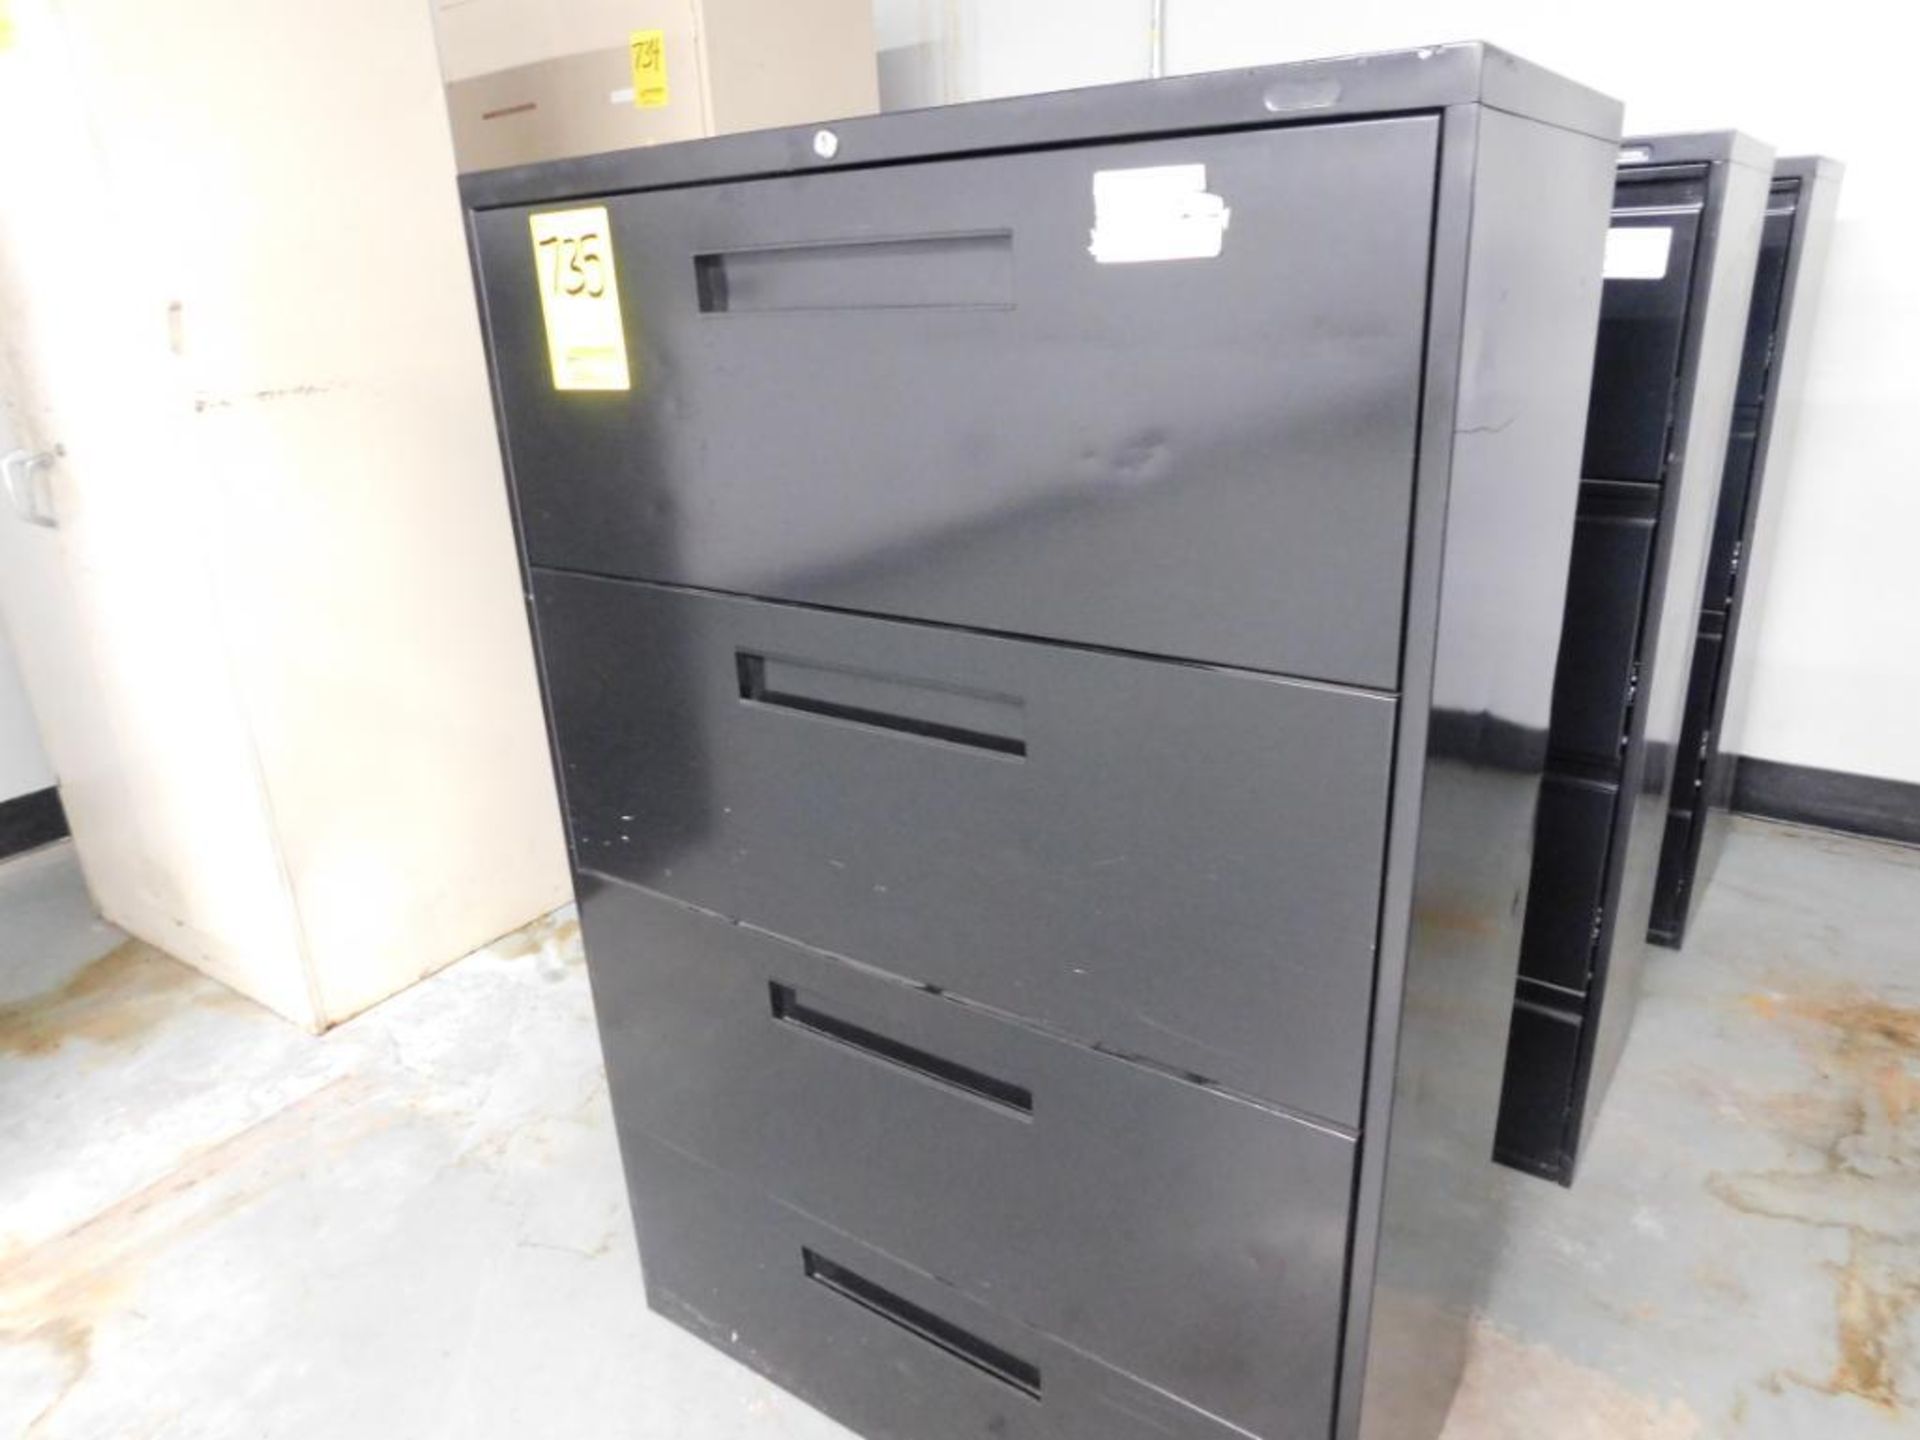 (3) 4-DRAWER FILE CABINETS